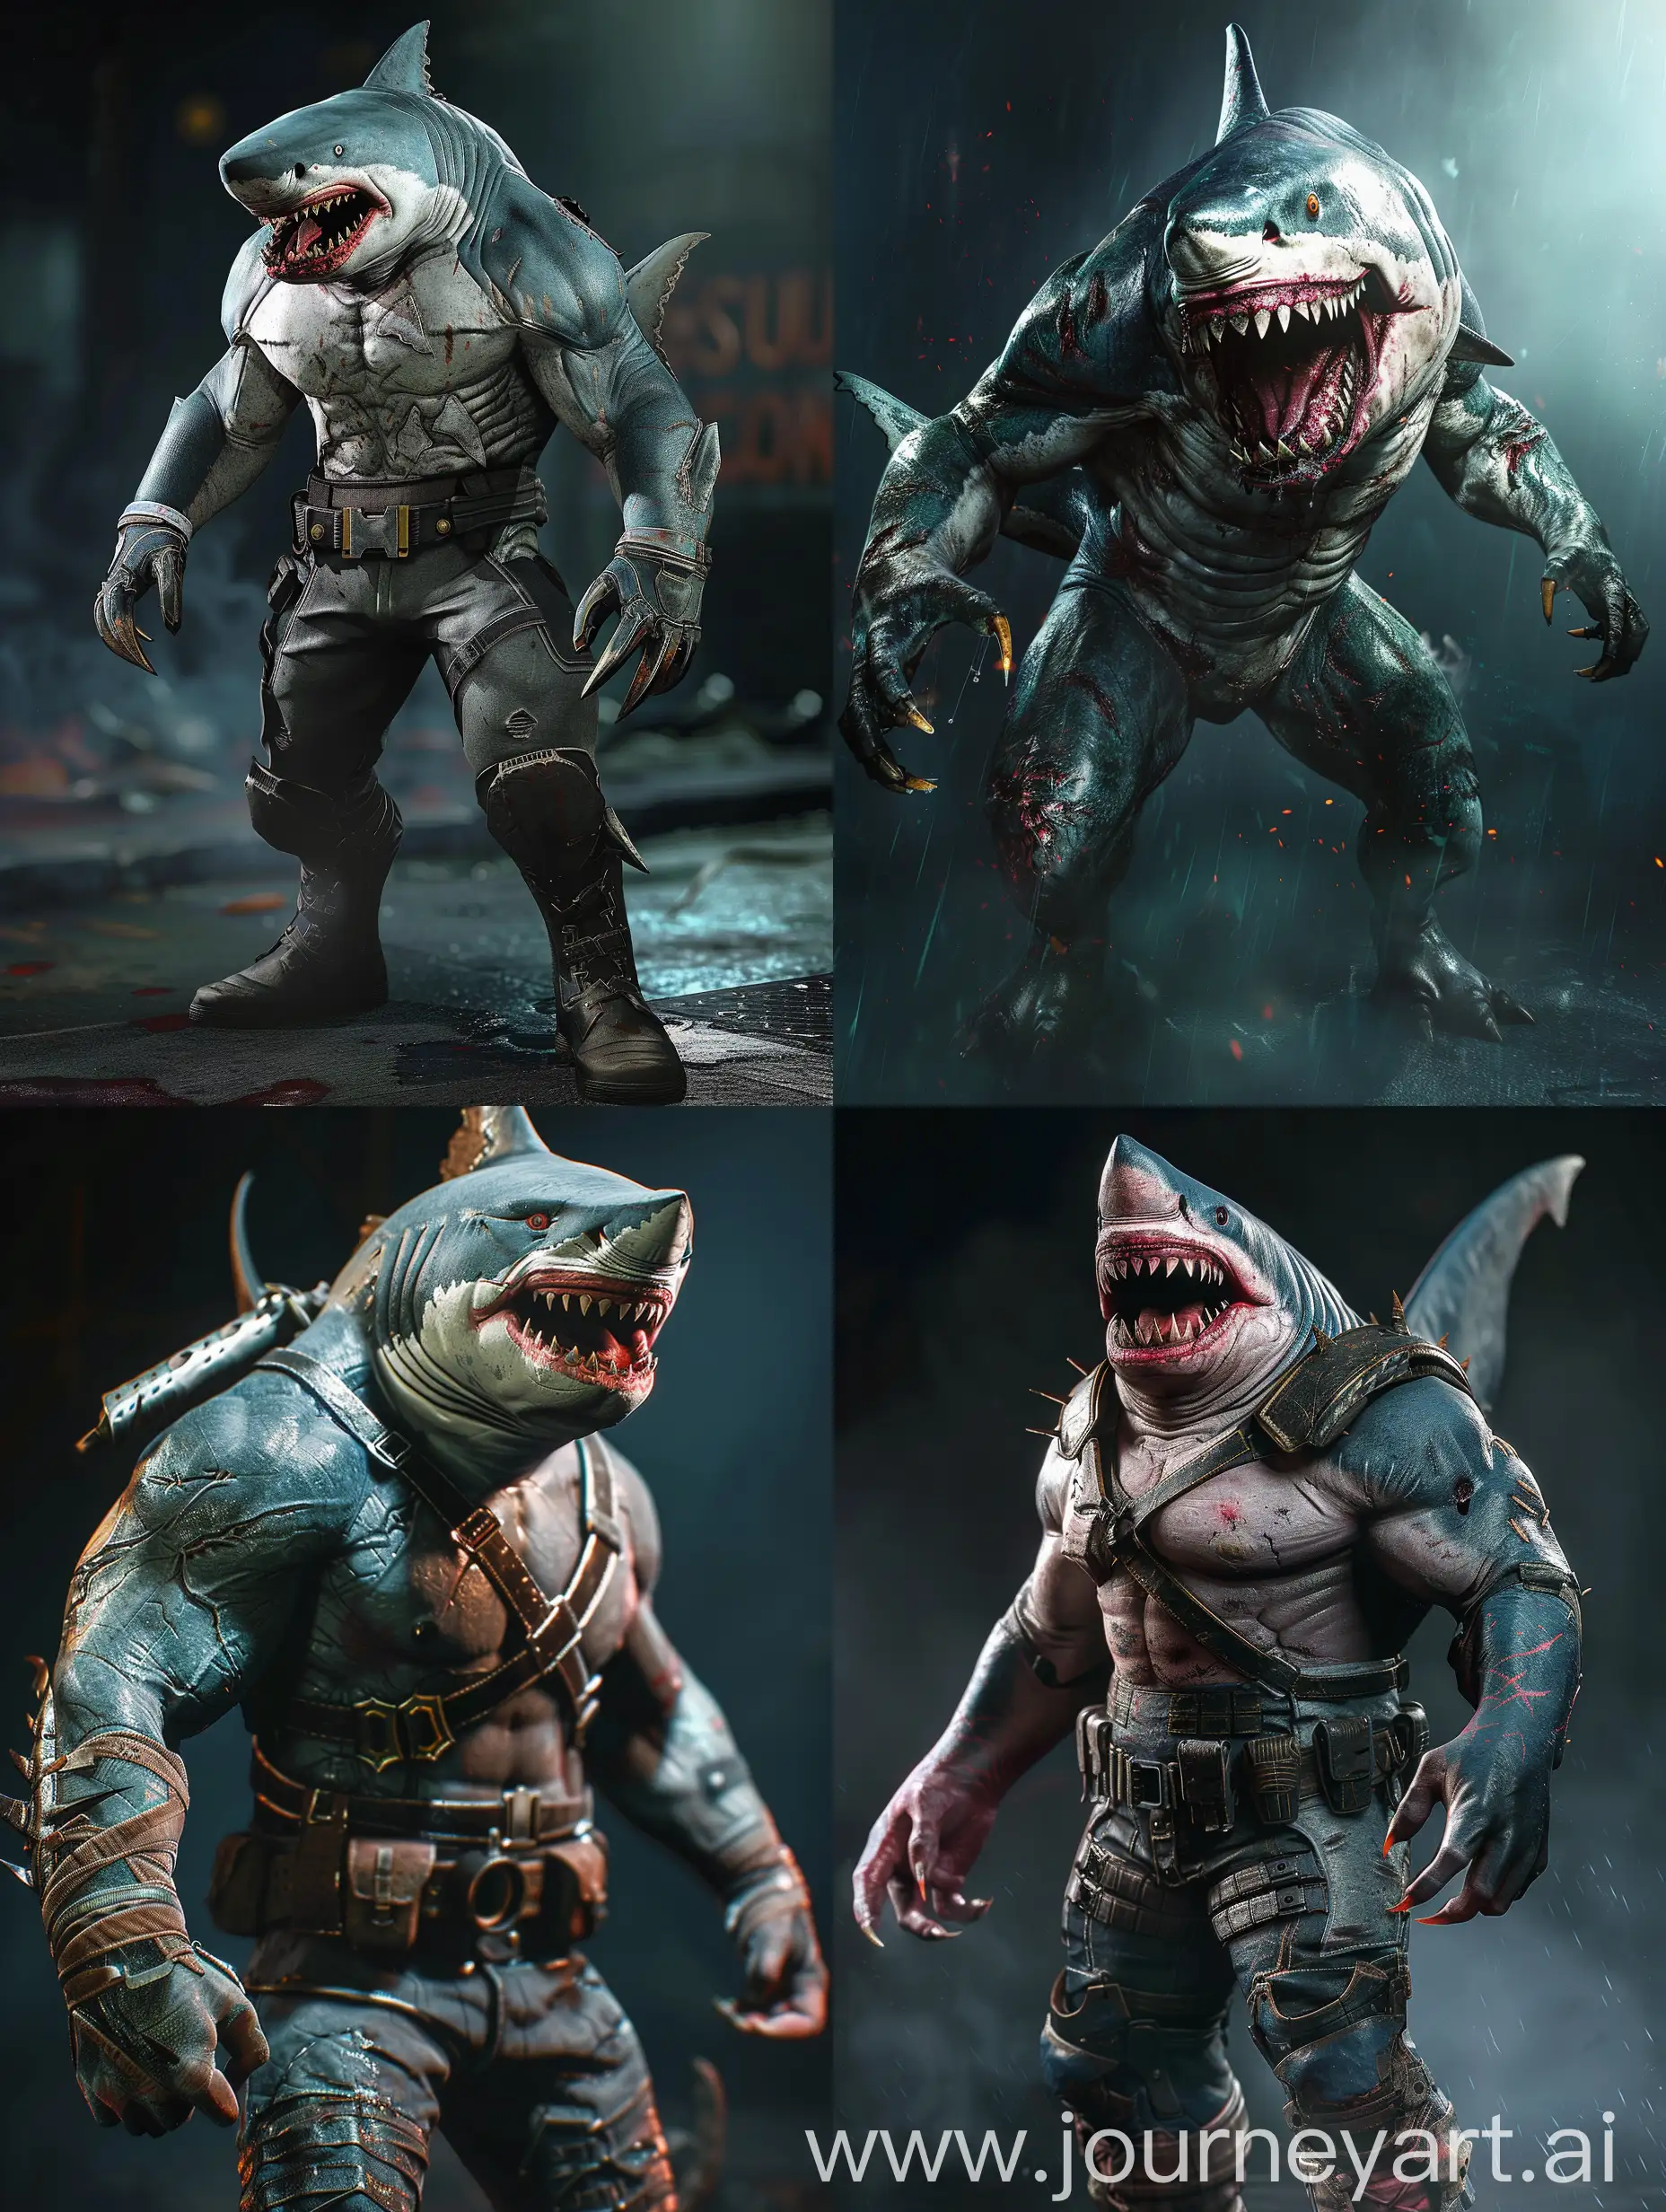 King Shark from the game "Suicide Squad" 